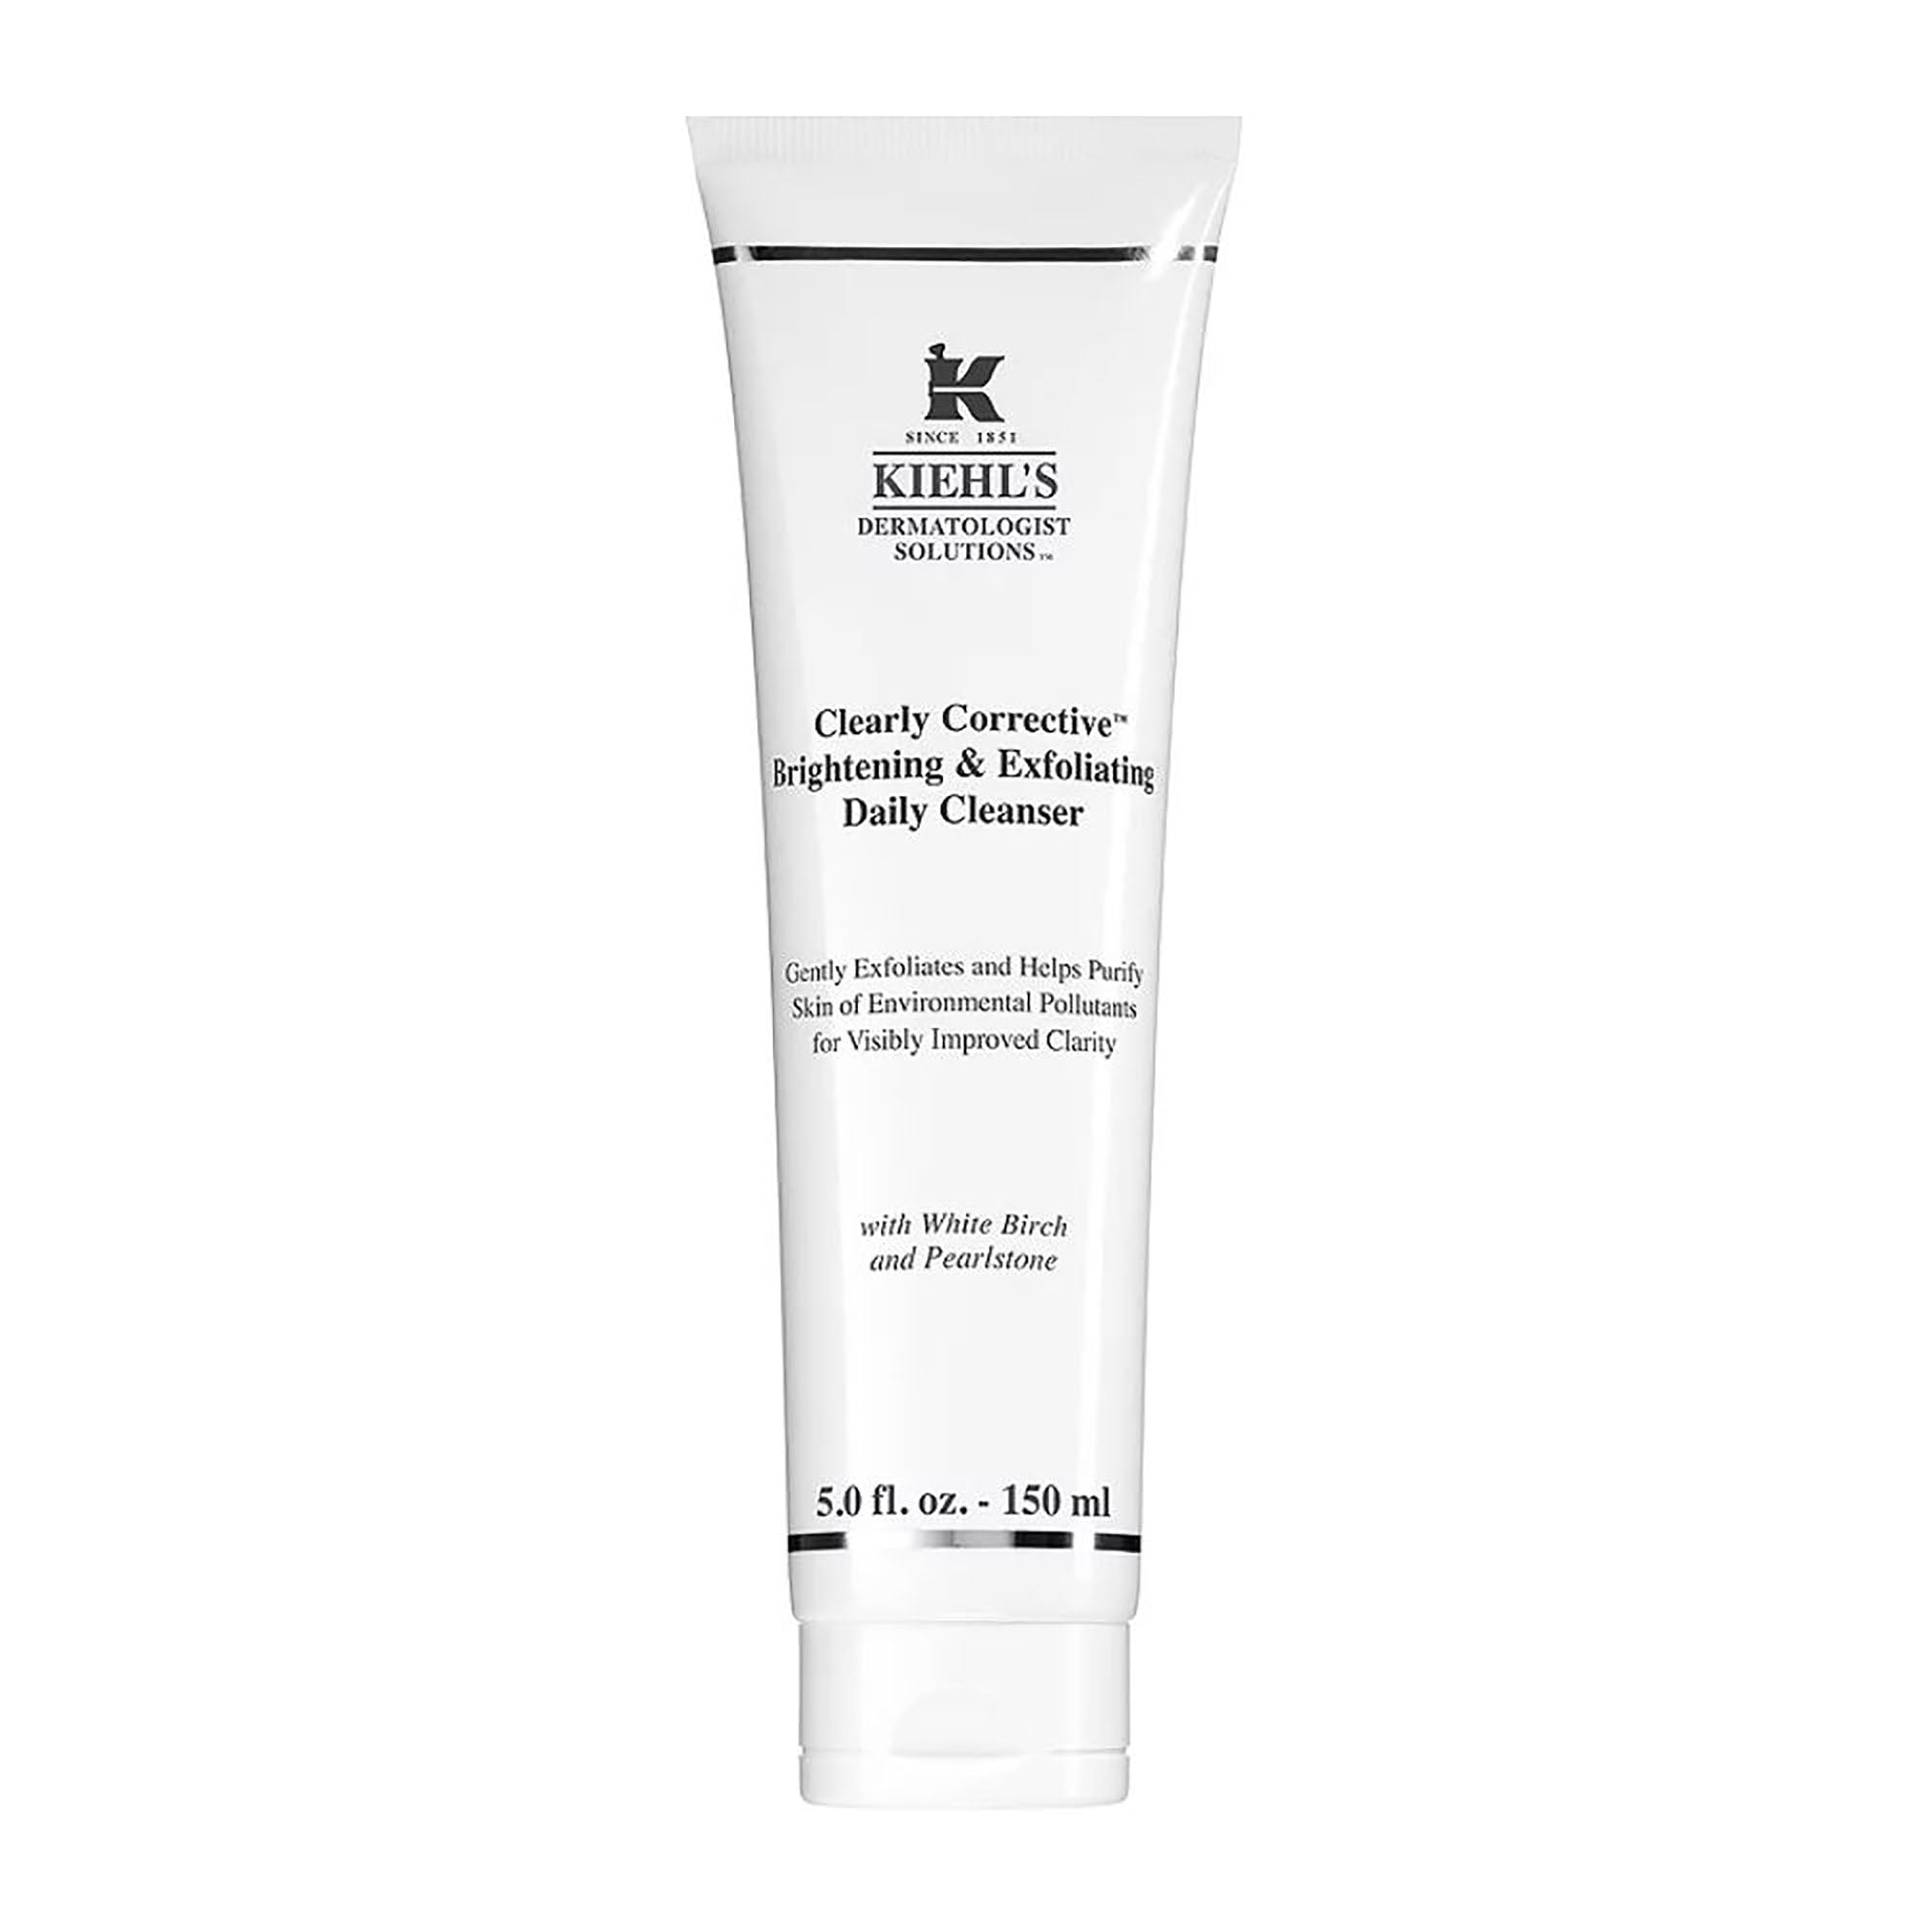 Kiehl's Clearly Corrective Brightening & Exfoliating Daily Cleanser - 5oz / 5.OZ